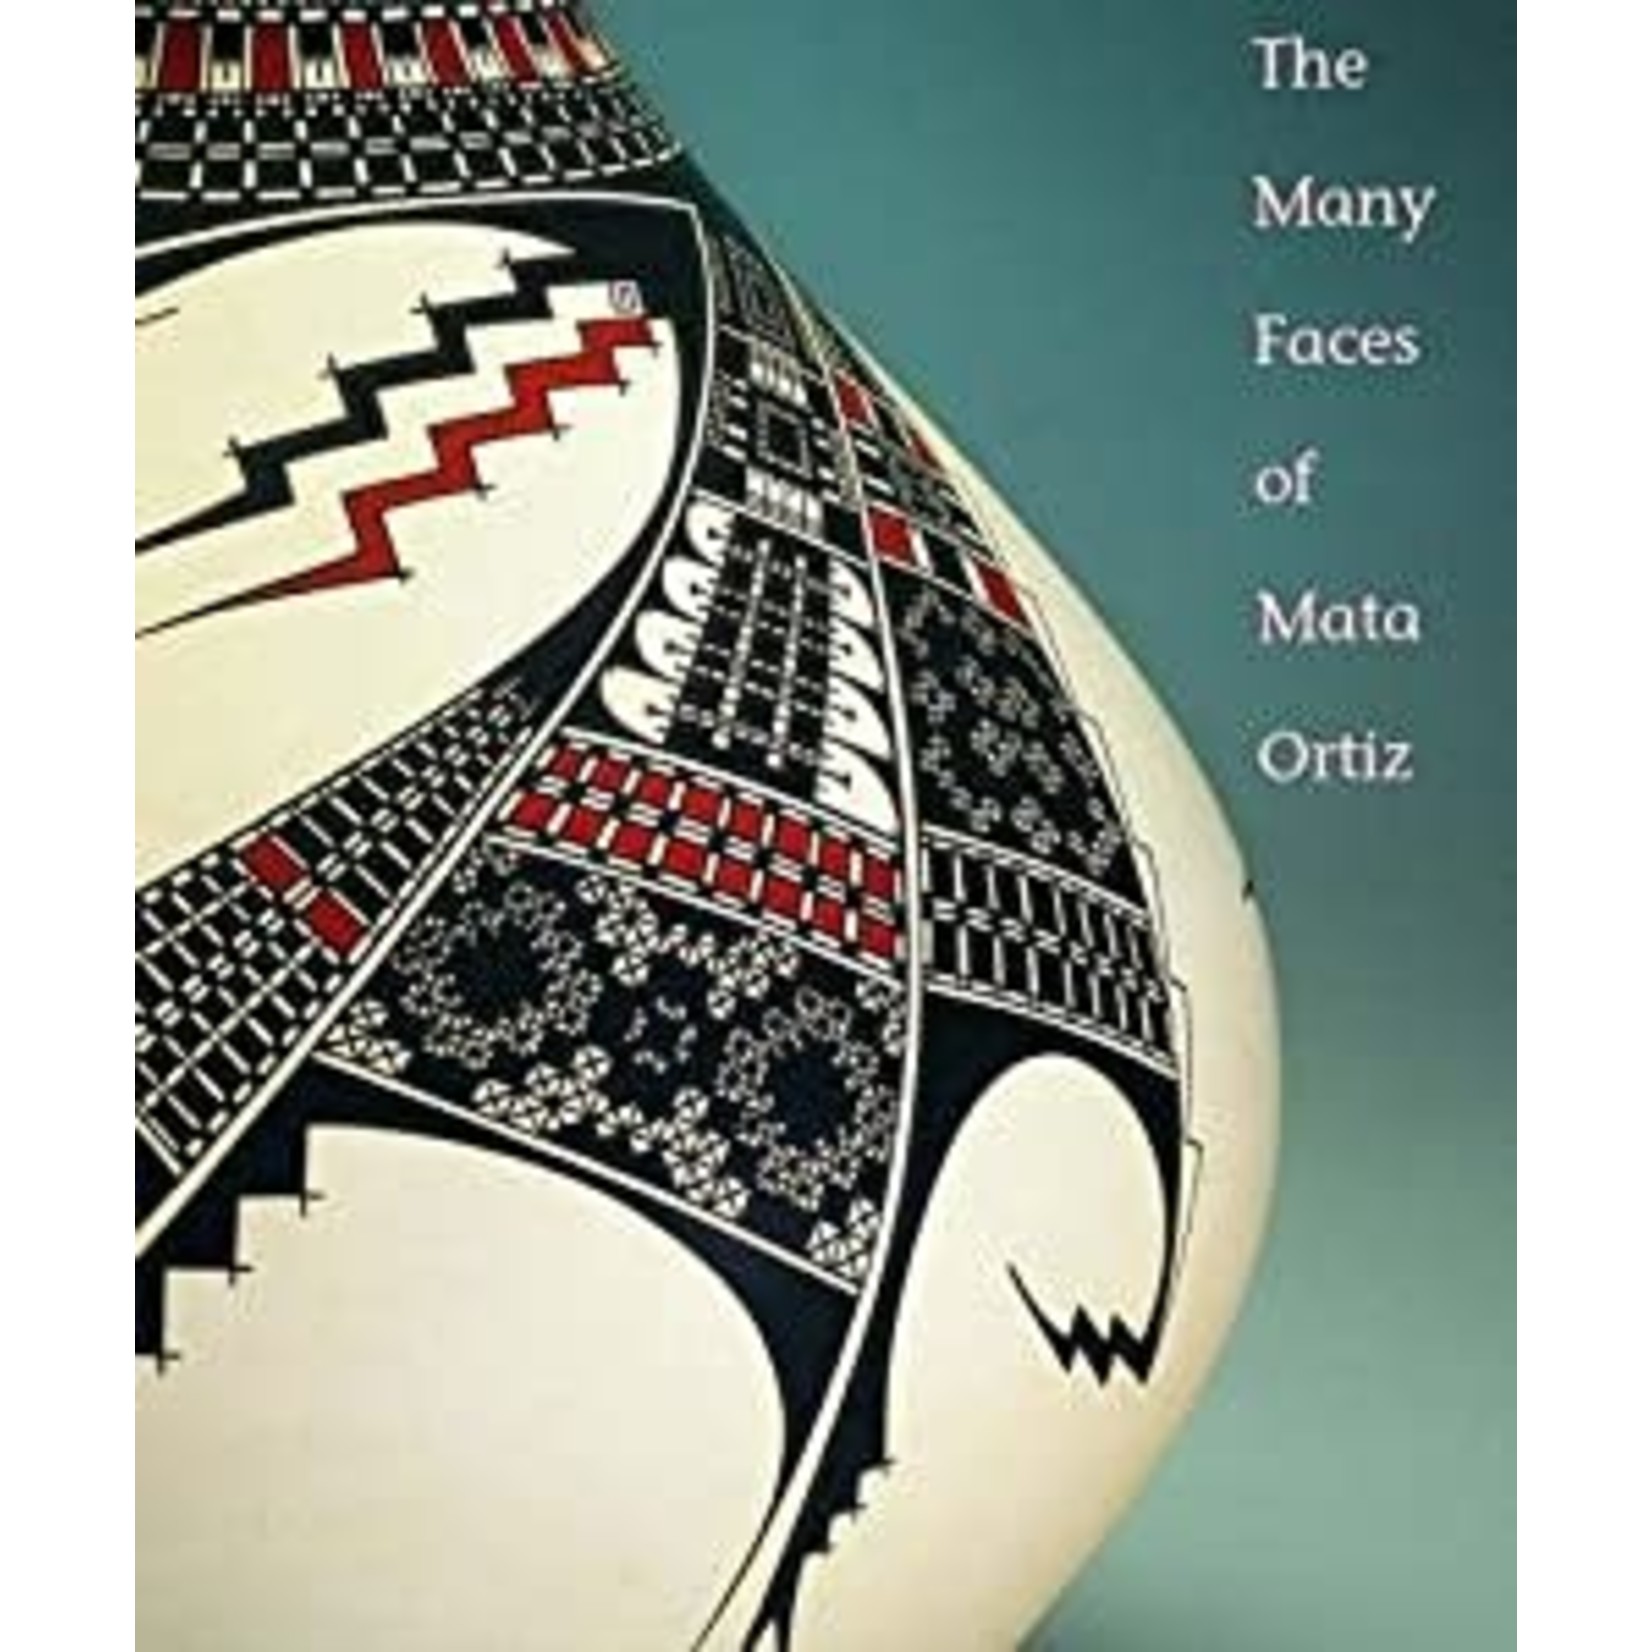 Lowell, Susan Lowell, Susan (Art) - The Many Faces of Mata Ortiz